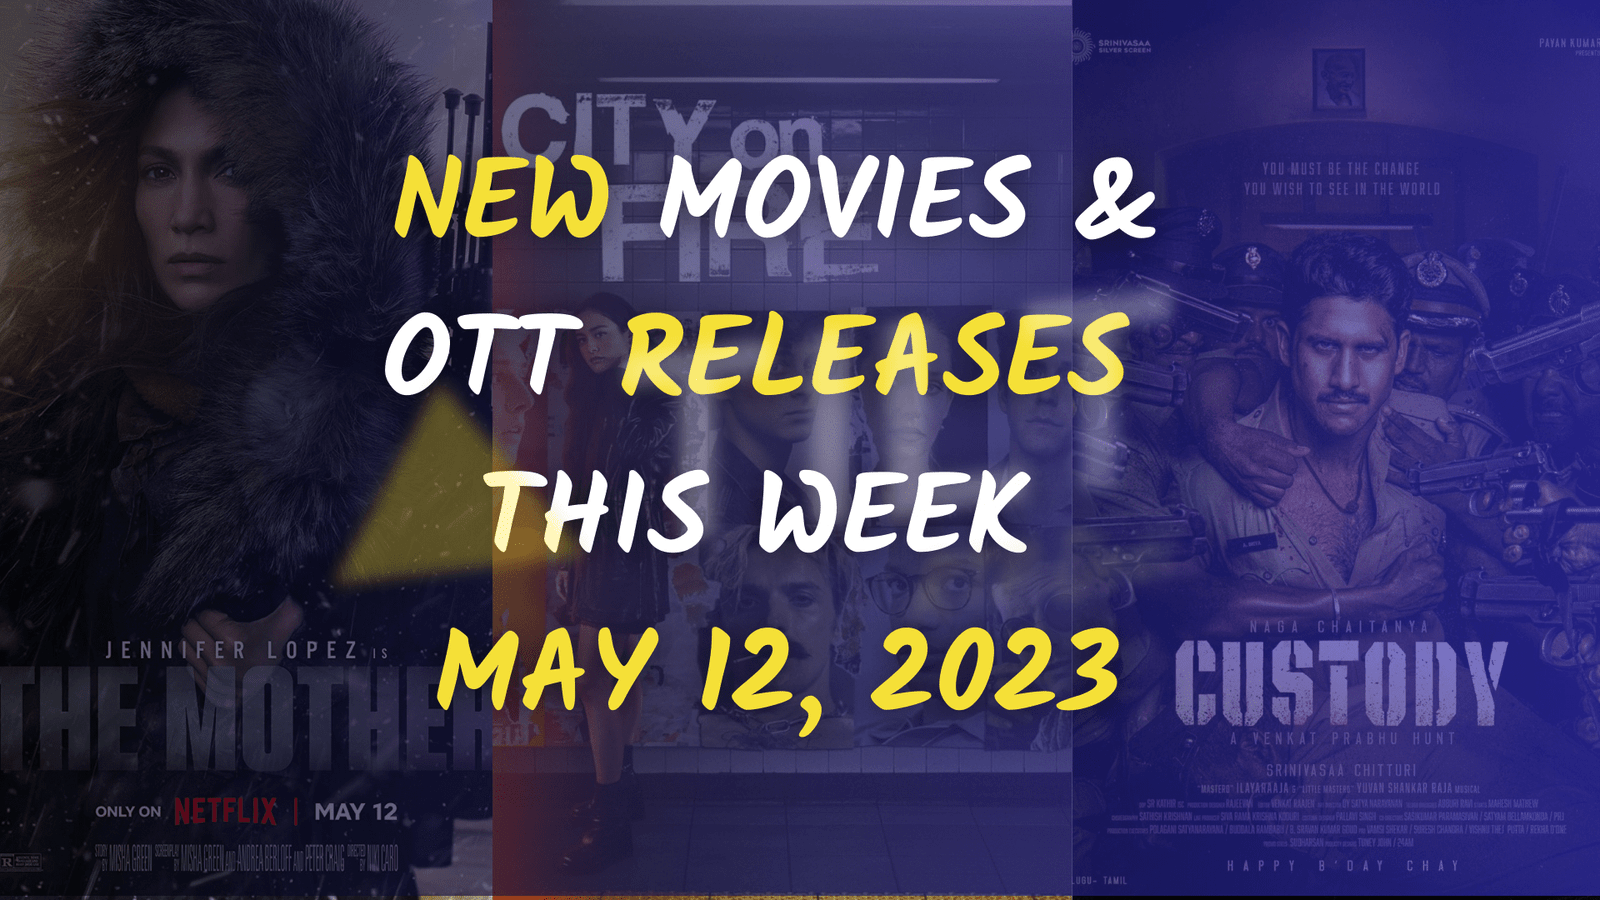 New Movies & OTT Releases This Week May 12, 2023